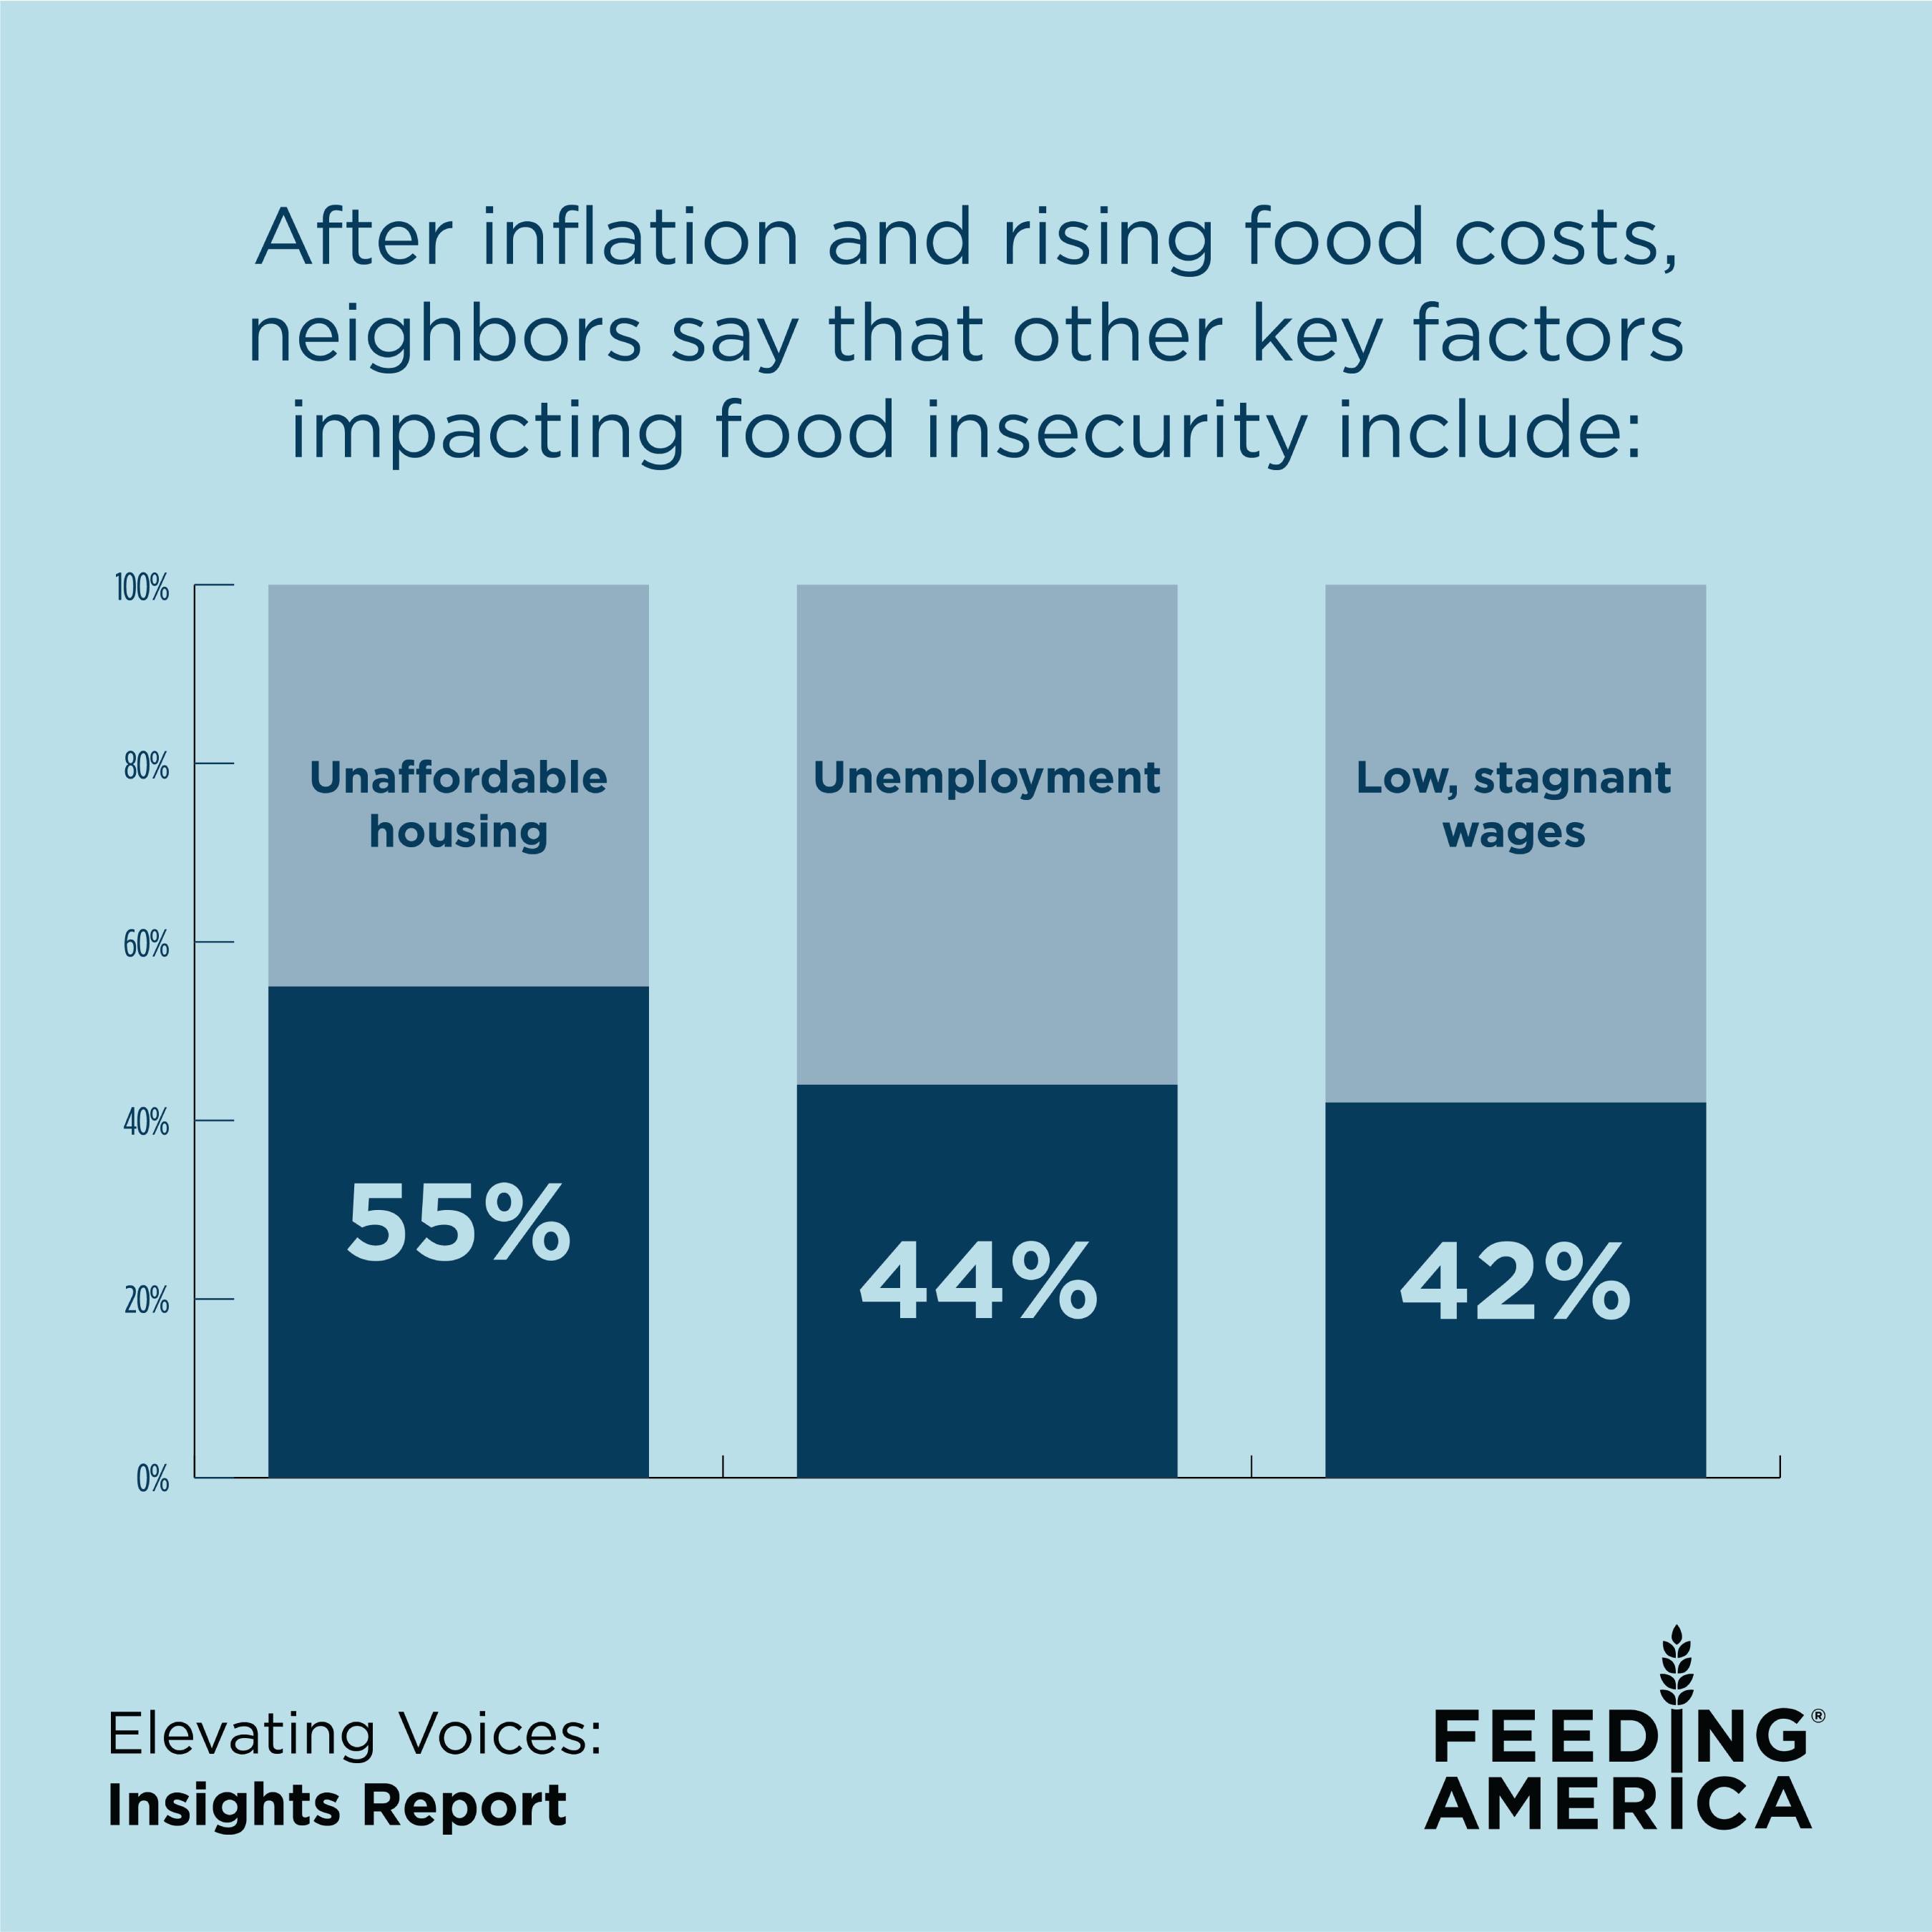 Neighbors cite several issues they say are related to the root causes of hunger and food insecurity in America: high cost of rent or buying a home (55%), losing a job and being unemployed (44%), and too many low-wage jobs (42%).